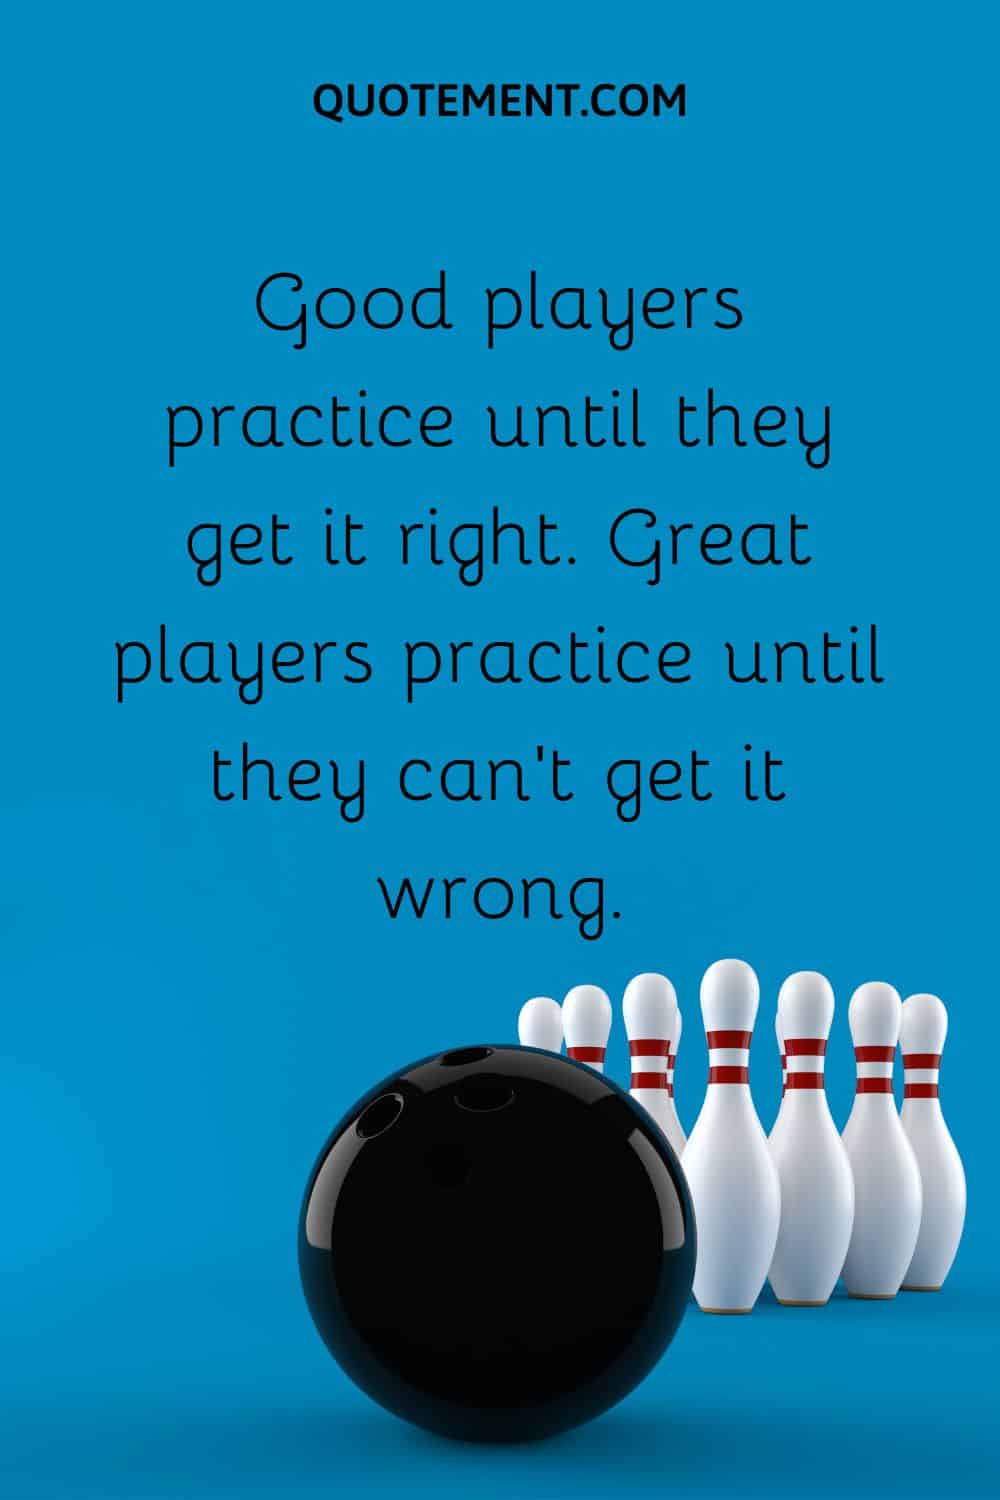 Good players practice until they get it right